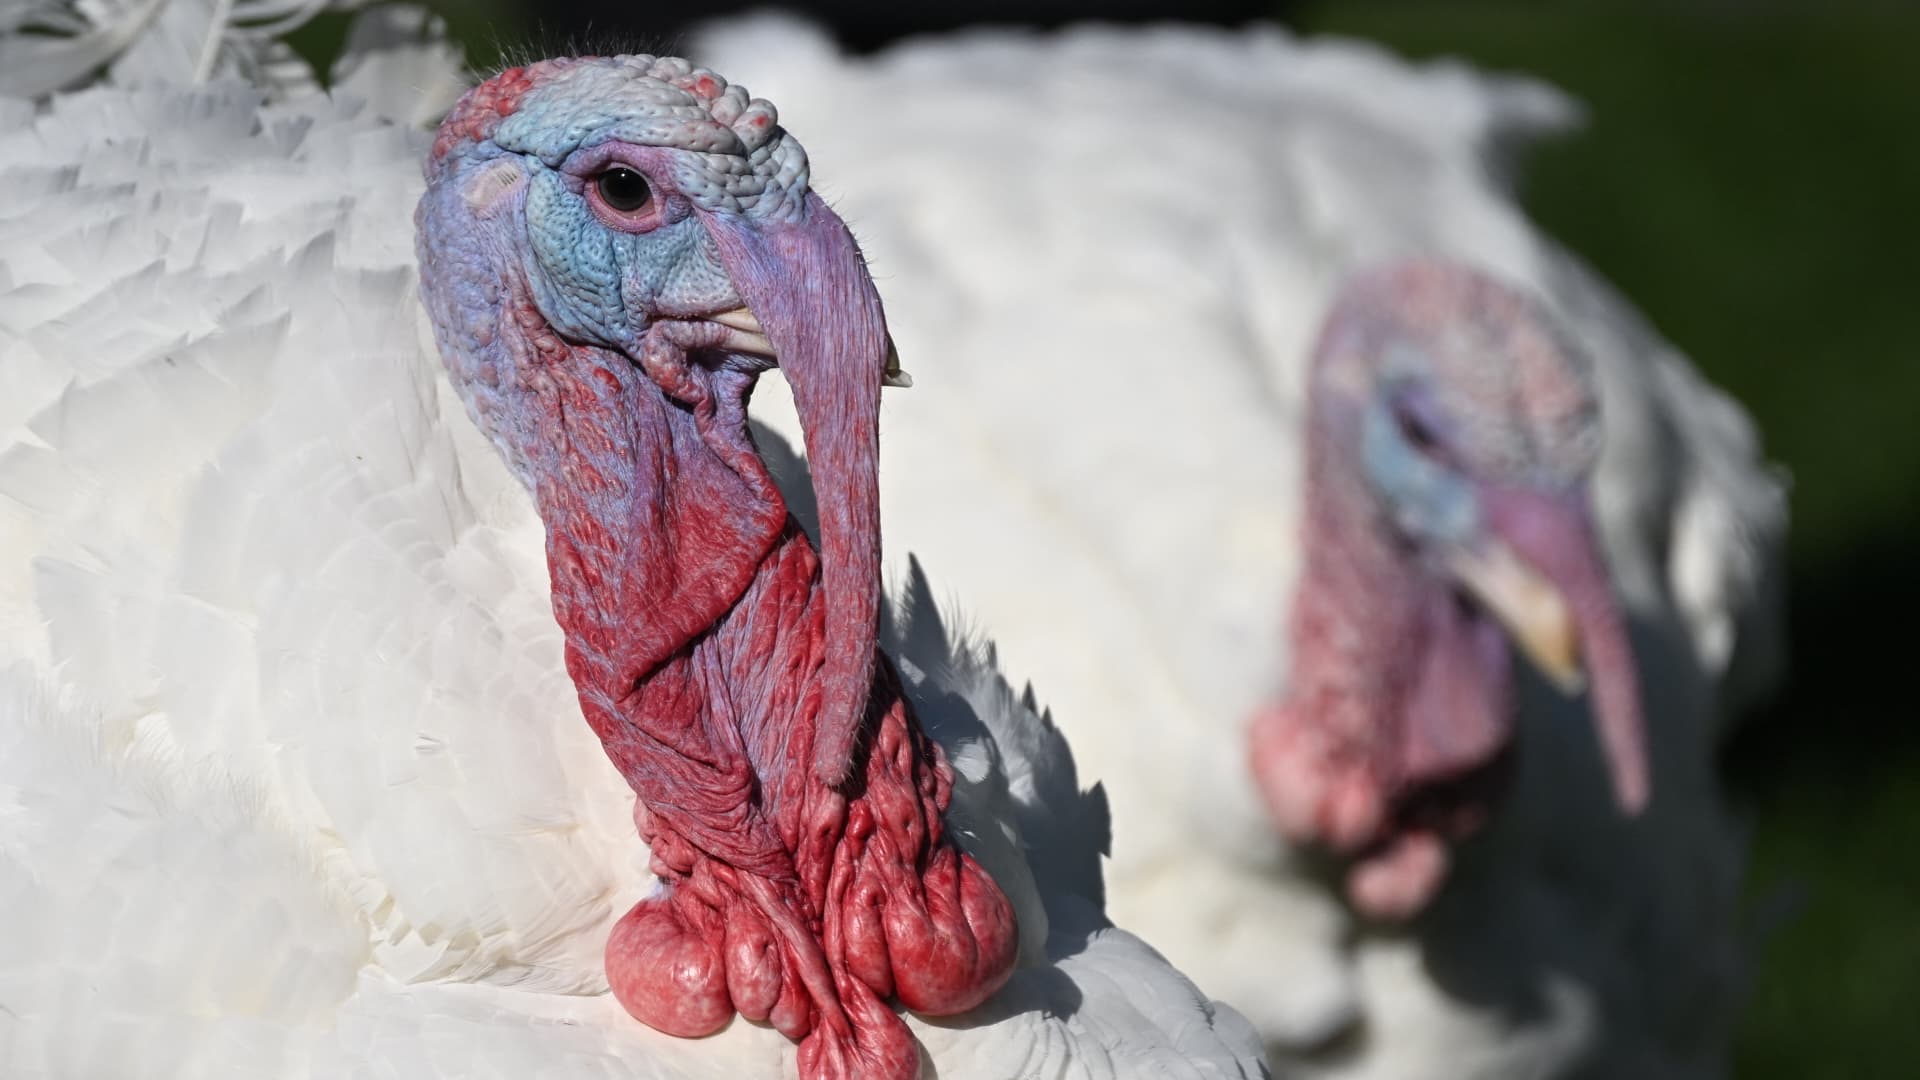 The two national Thanksgiving turkeys, Chocolate and Chip, are photographed on the South Lawn of the White House before a pardon ceremony in Washington, DC, on November 21, 2022.